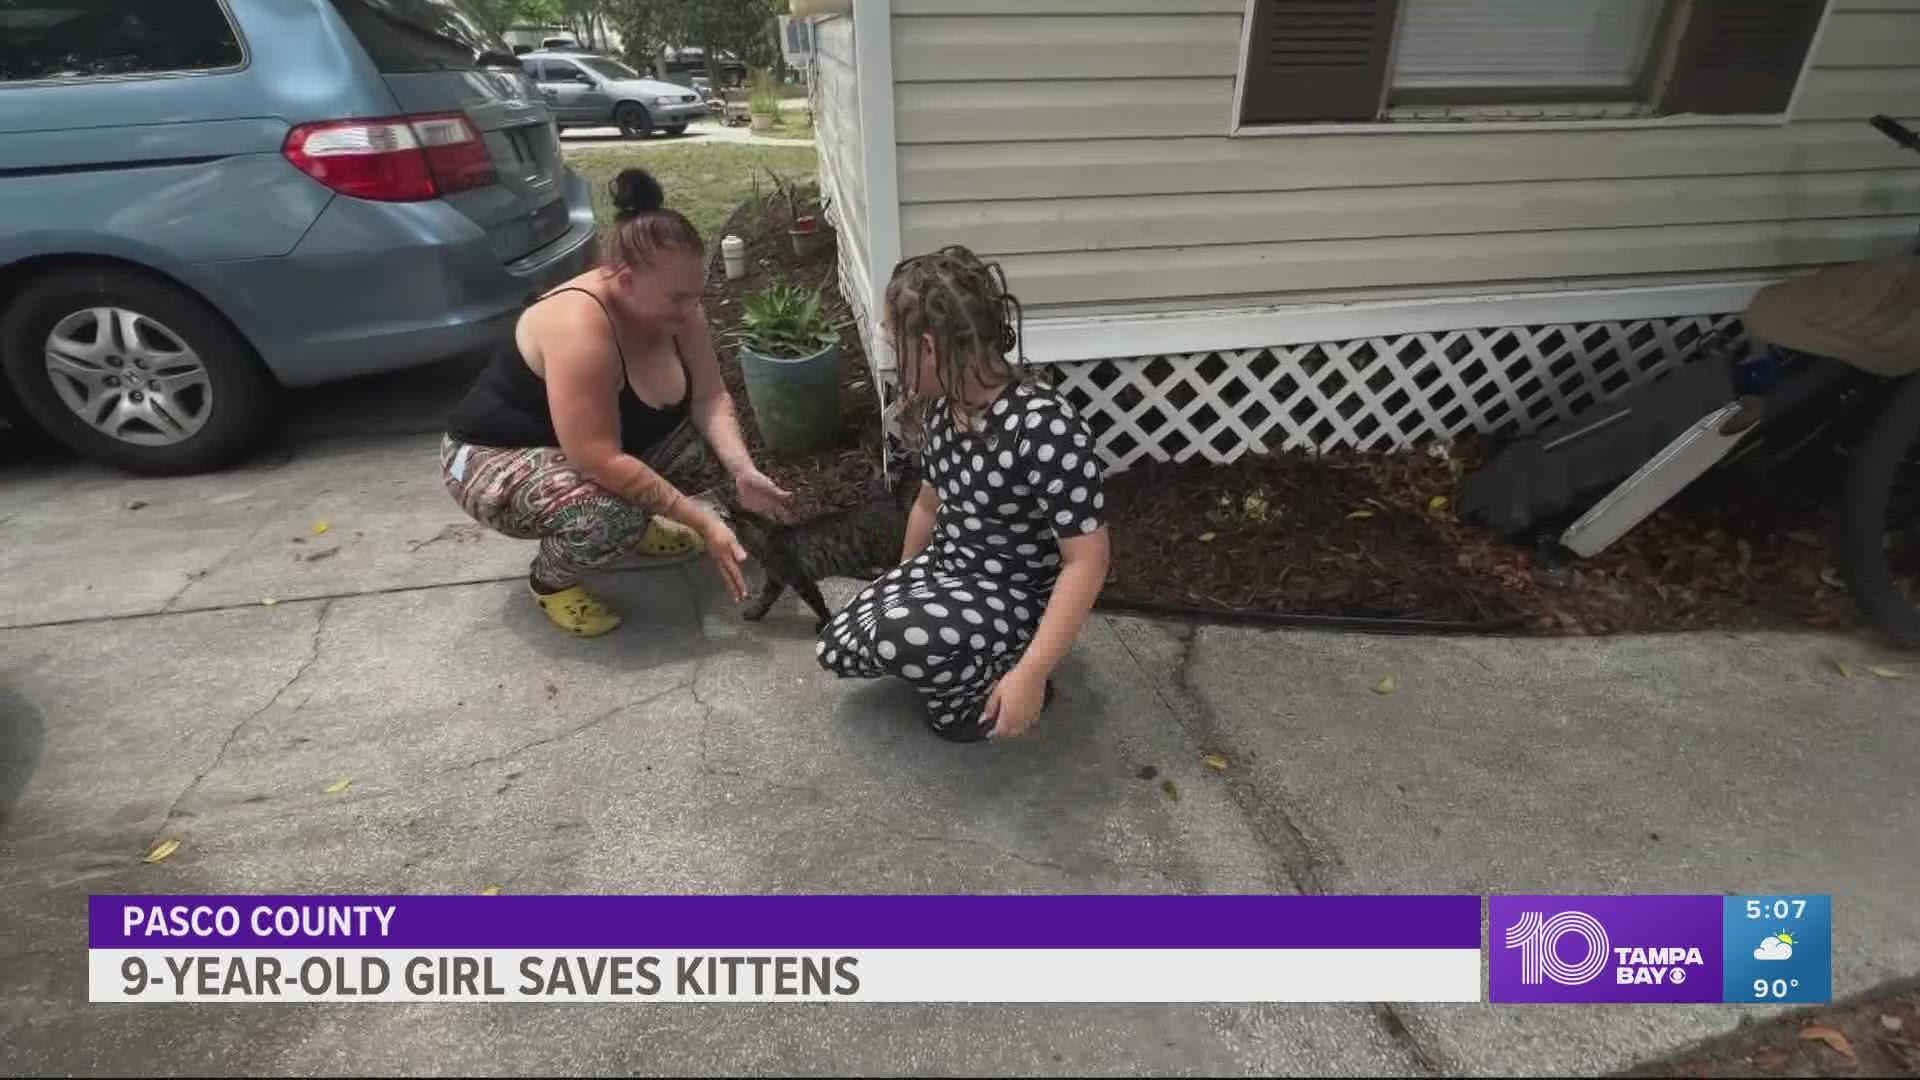 Olivia Rippeon says she saw kittens being drowned in Pasco County. Her family says she spoke up with the help of her mom, intervened and saved two of them.